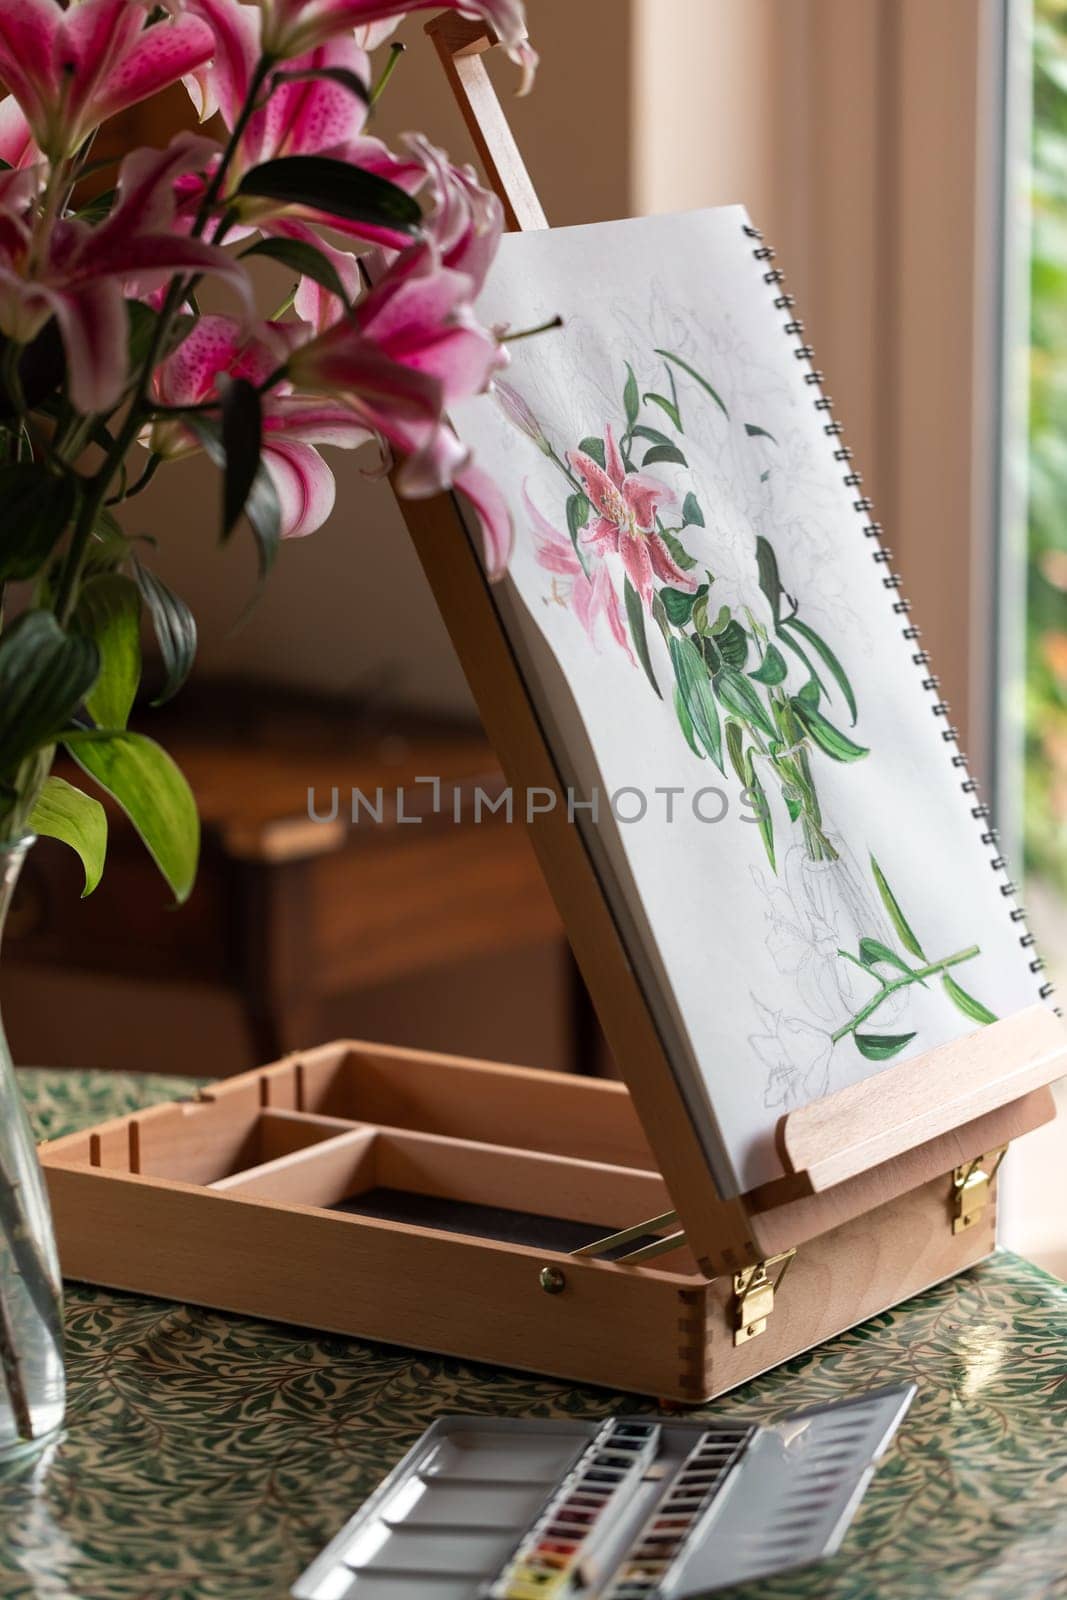 The easel with still life with purple lilies watercolor on the table prepared for painting at home